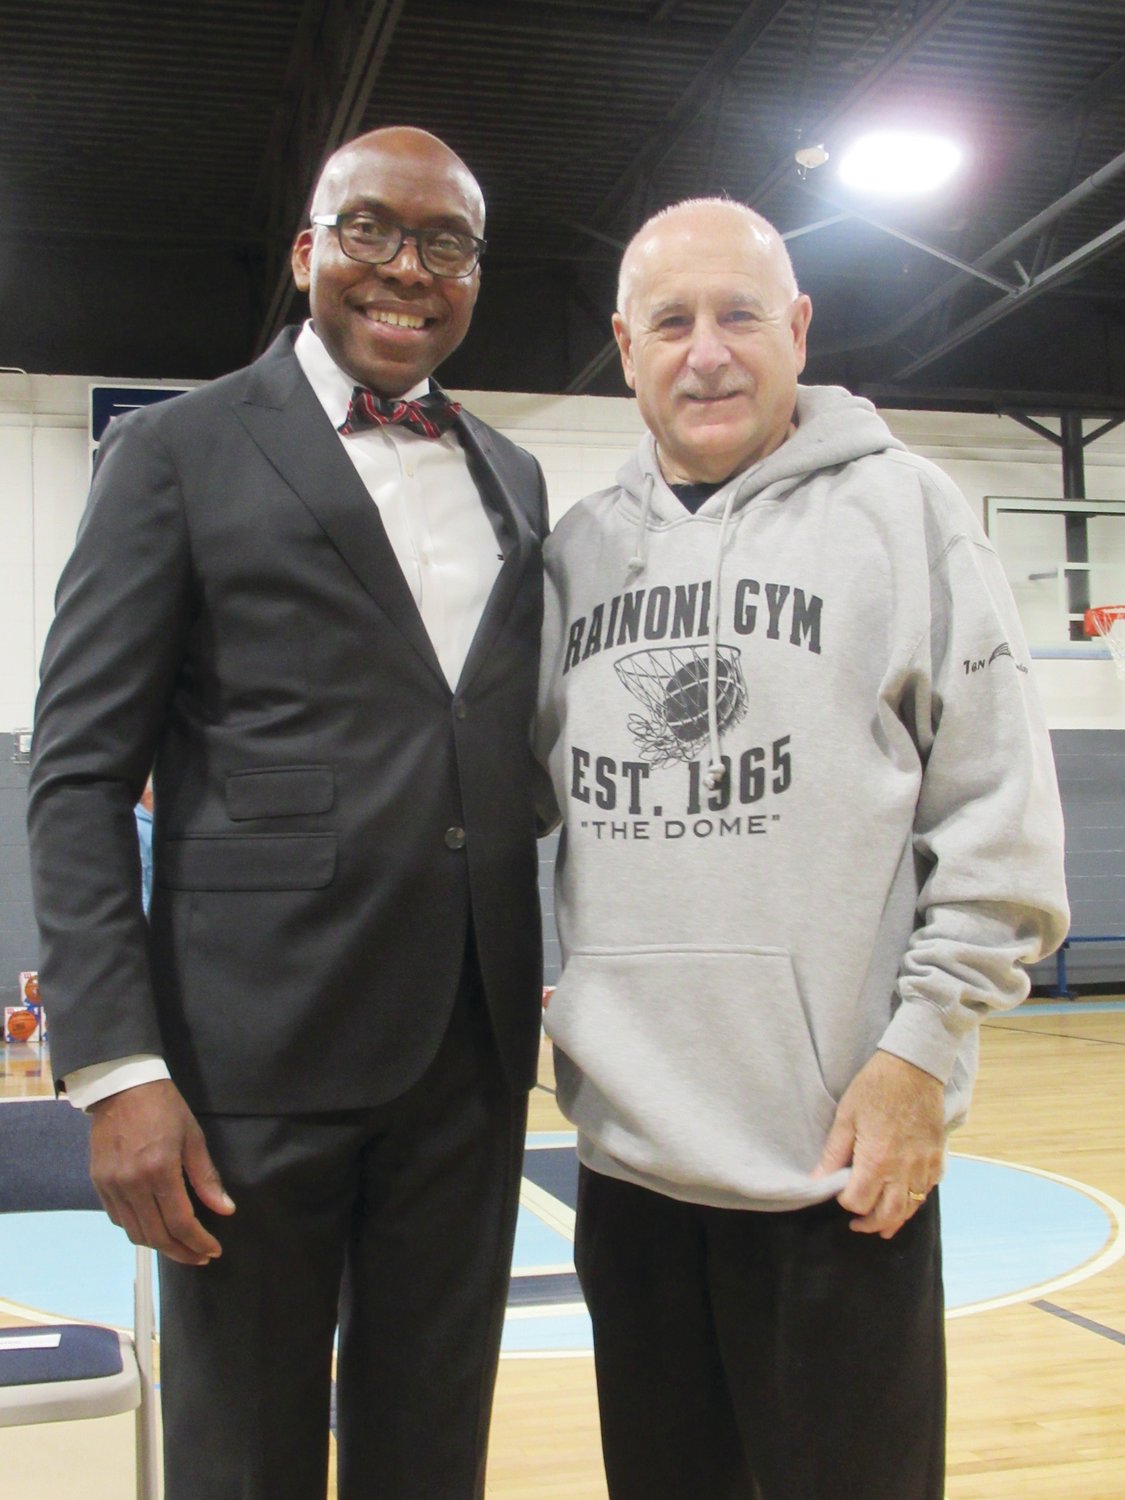 SPECIAL SPEAKERS: Pastor Chris Abhulime of King’s Tabernacle Church in Johnston joins his friend Mayor Joseph Polisena during Saturday’s re-dedication of Rainone Gym.